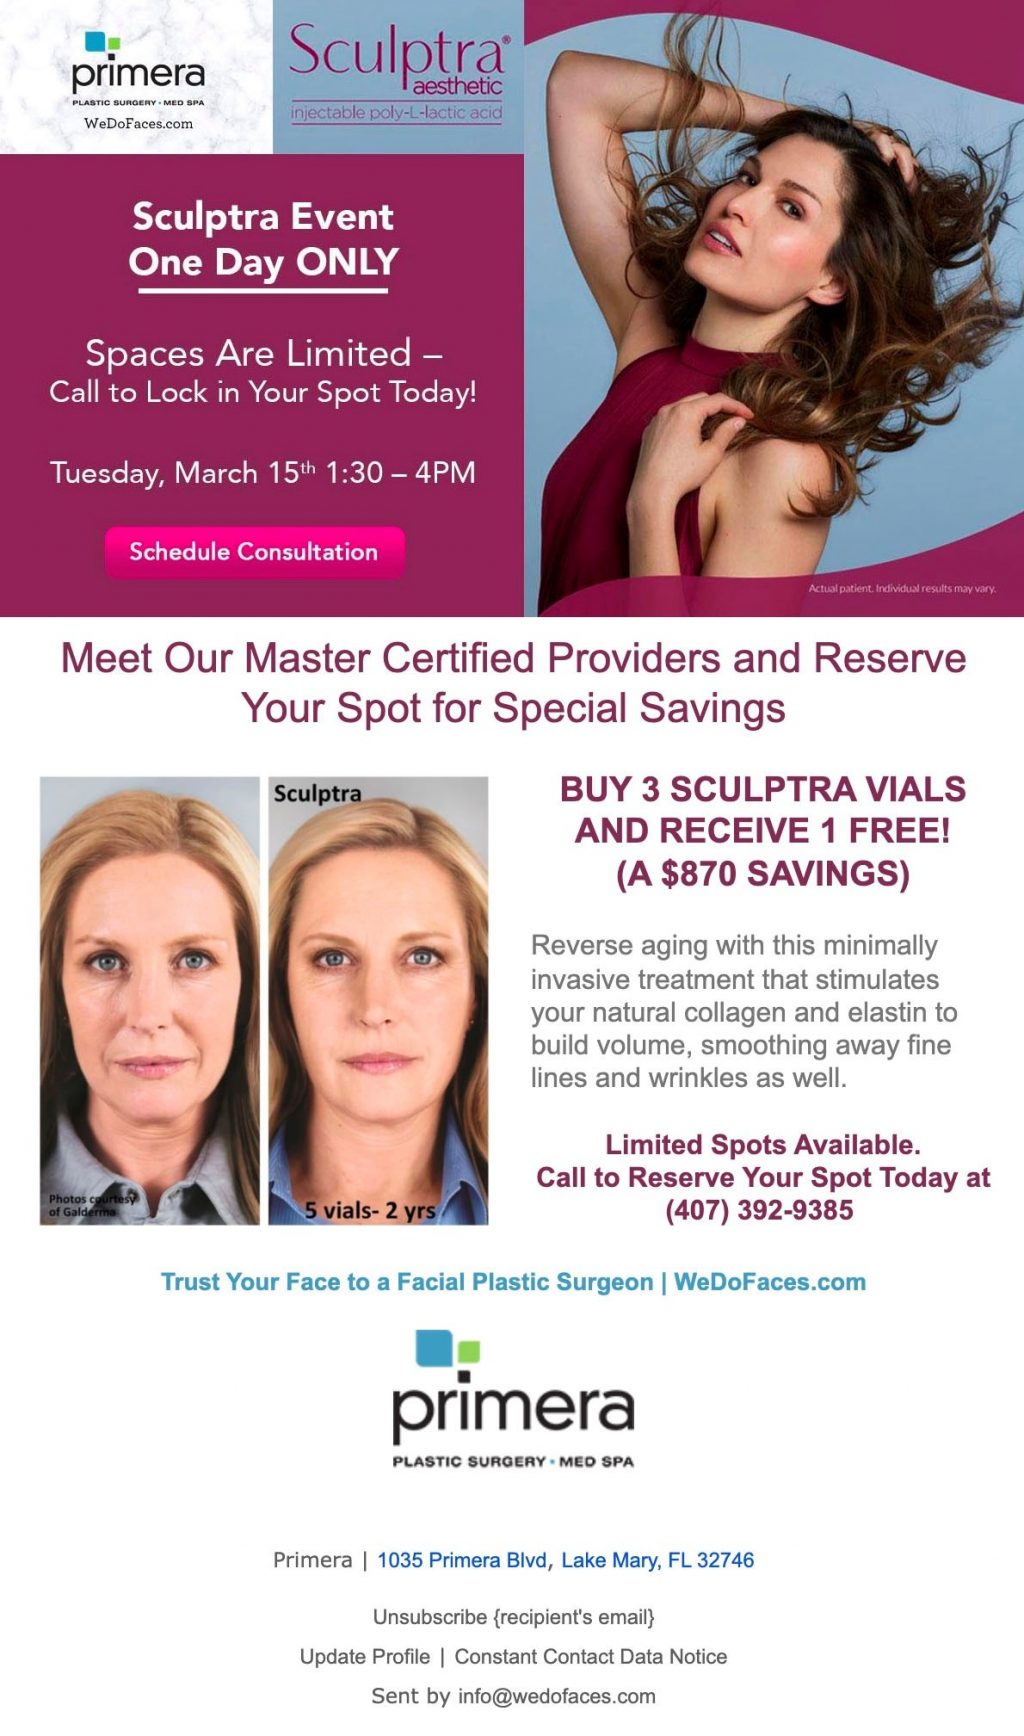 Flyer showing a woman promoting a Sculptra sales event on March 15, 2002